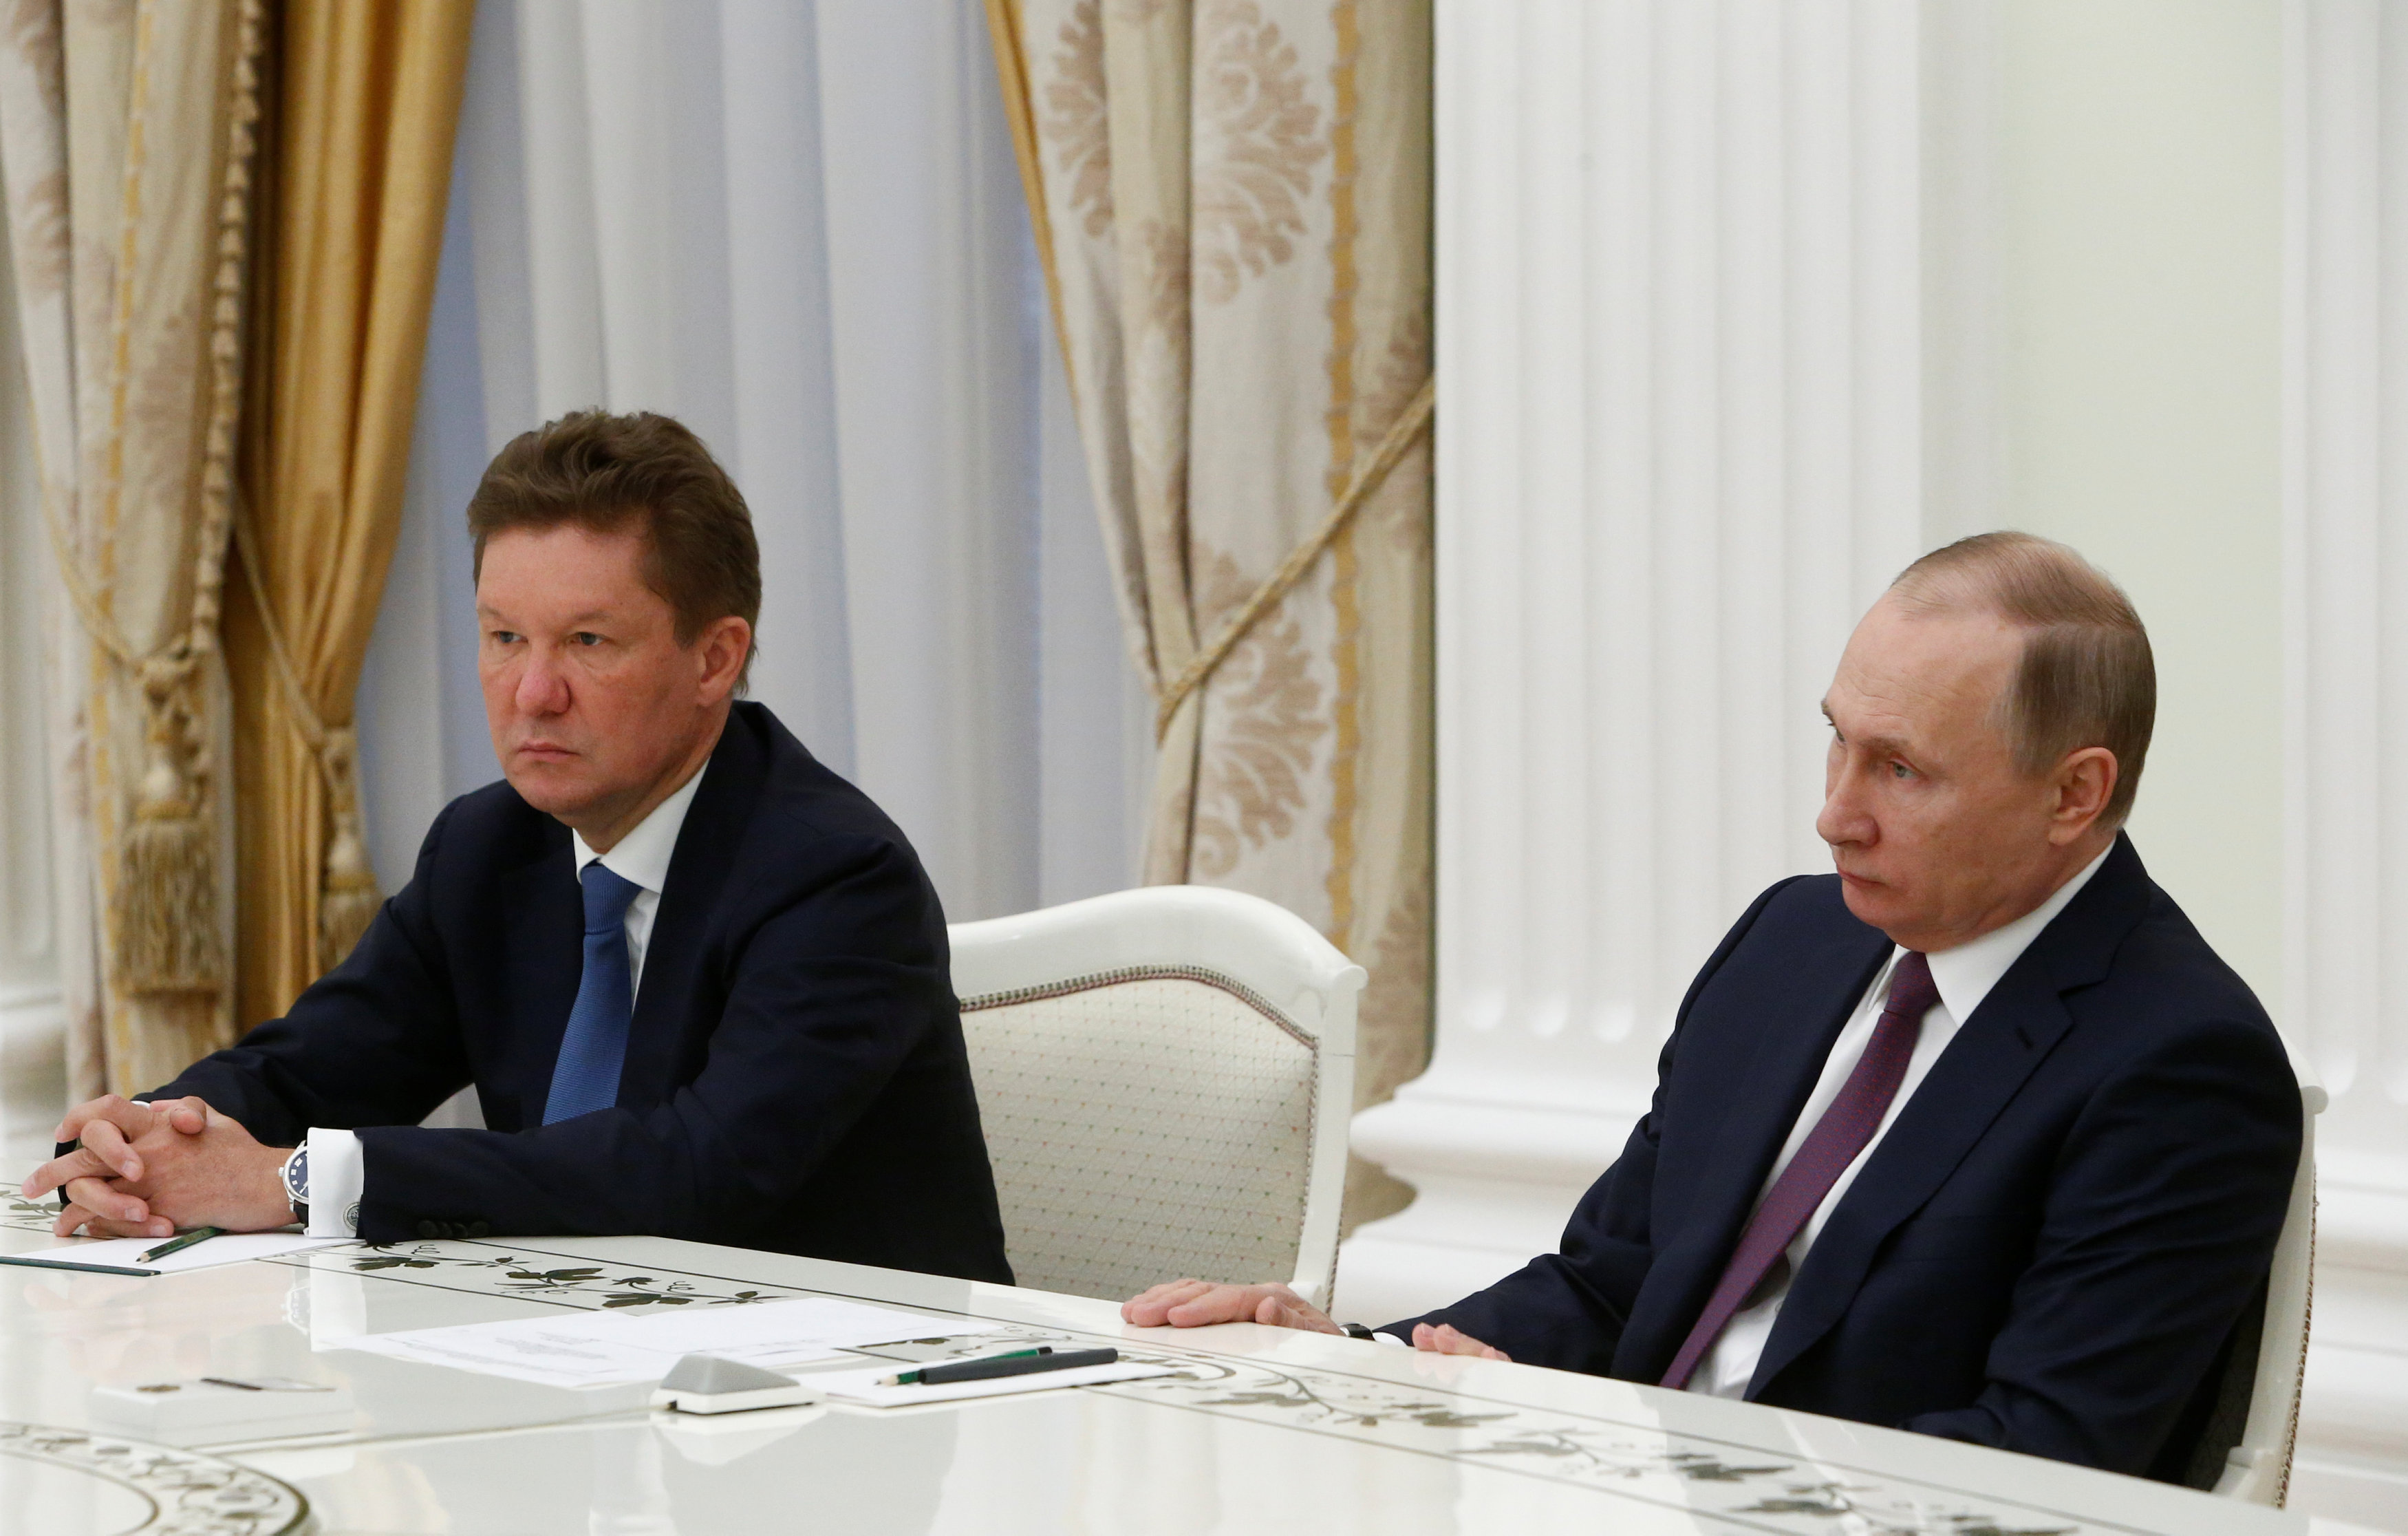 Russia's President Vladimir Putin (R) and Russian state gas company Gazprom Chief Executive Officer Alexei Miller attend a meeting with Austrian oil and gas group OMV Chief Executive Officer Rainer Seele (not pictured) at the Kremlin in Moscow, Russia April 28, 2017. (Sergei Karpukhin / Reuters)